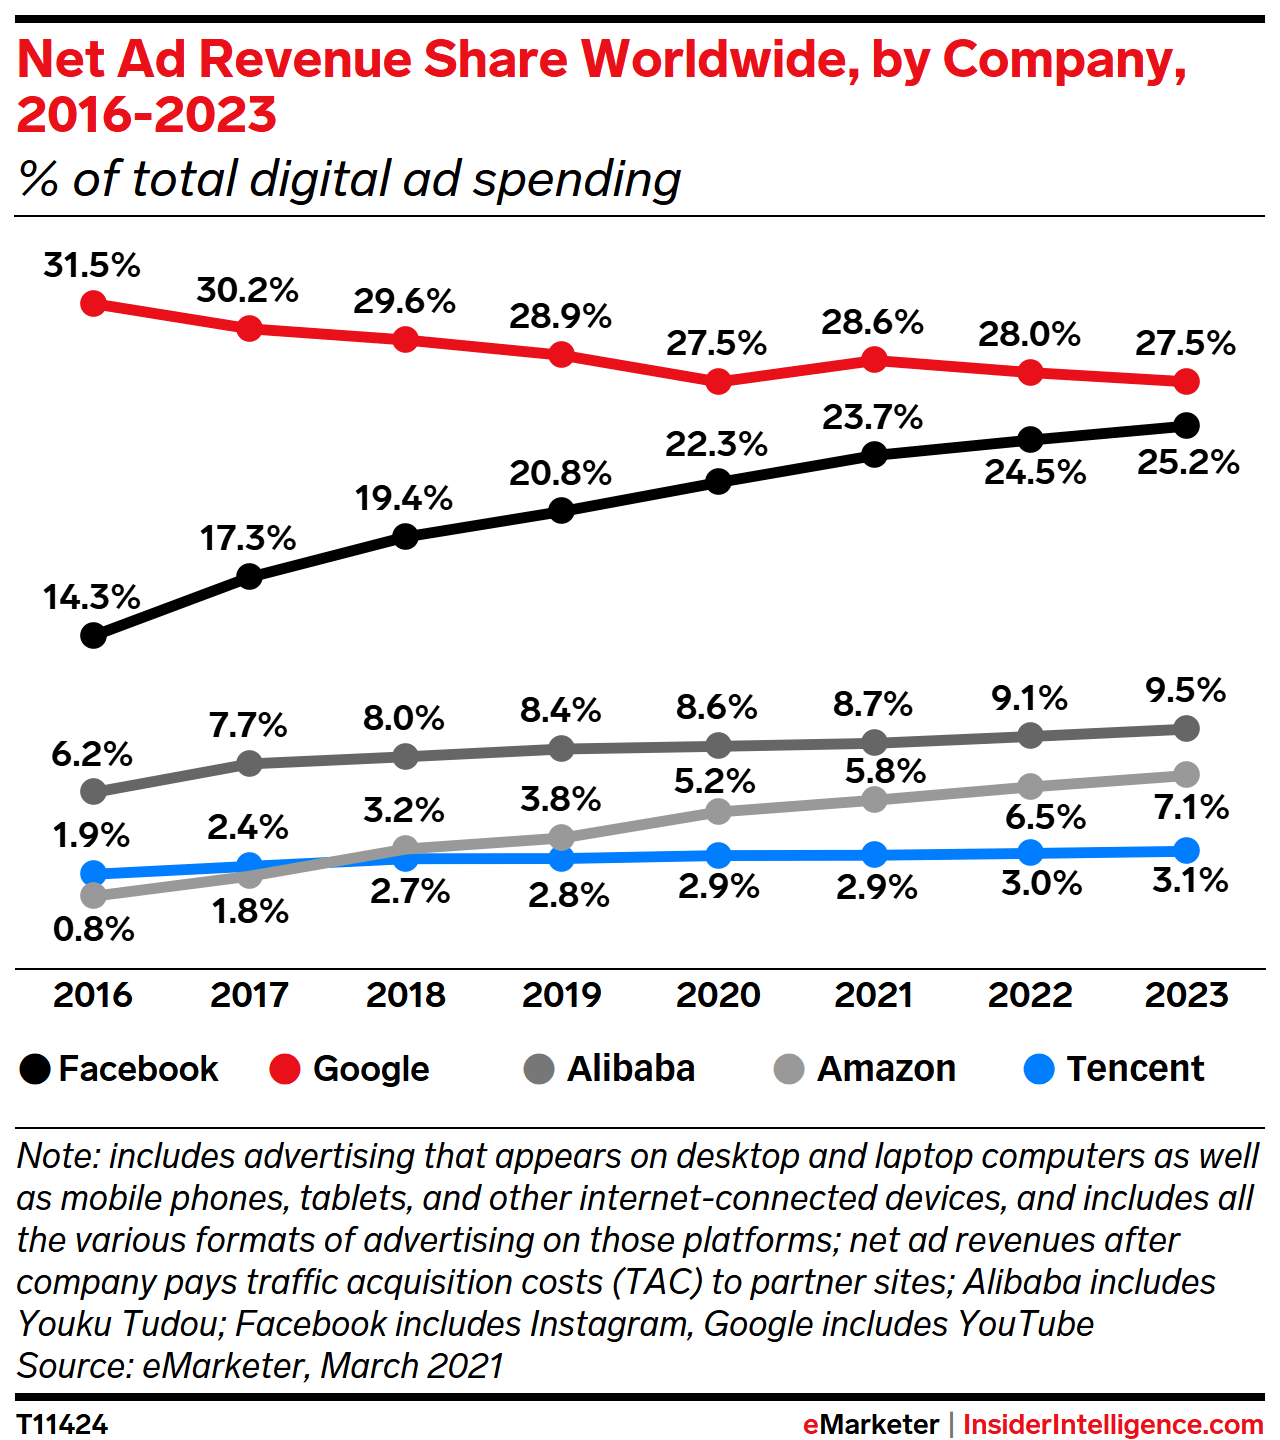 Duopoly still rules the global digital ad market, but Alibaba and Amazon are on the prowl